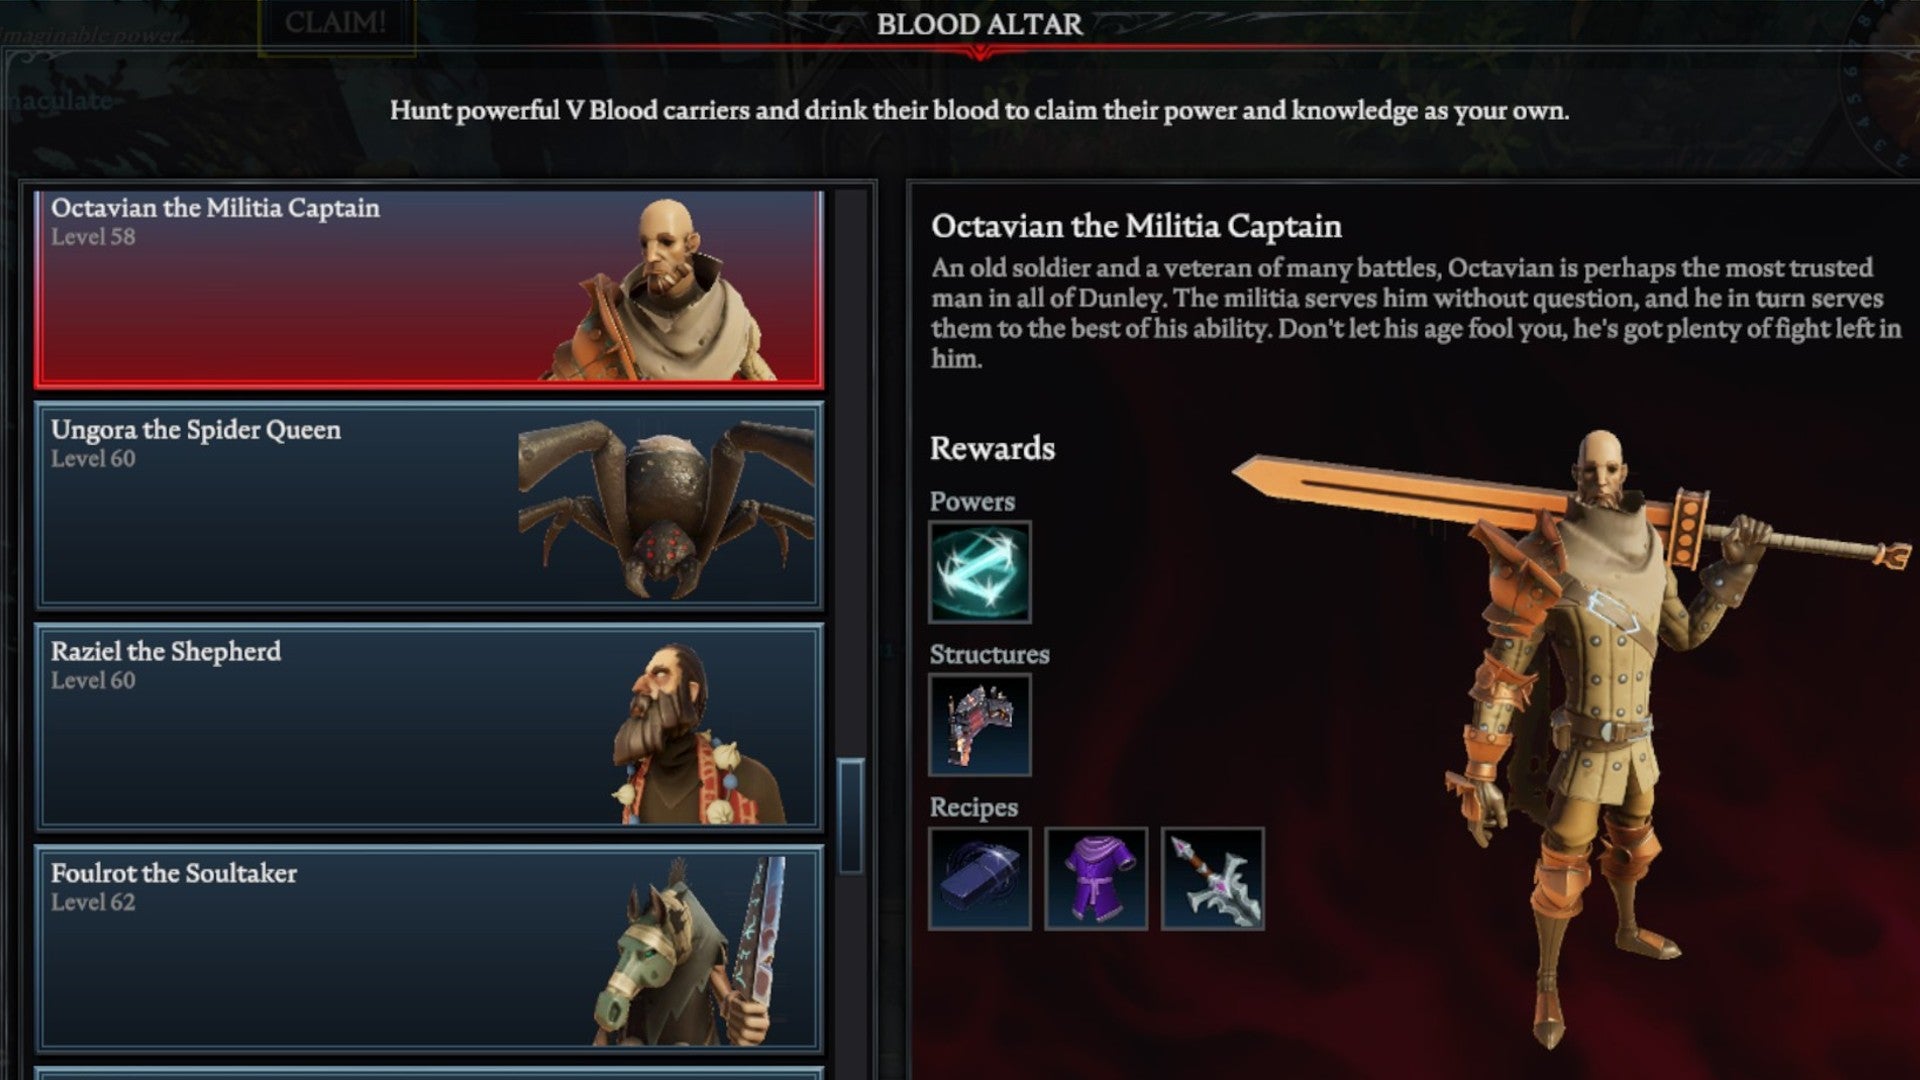 V Rising Octavian the Militia Captain Blood Altar tracking page, showing an image of the soldier on the right and a list of bosses on the left